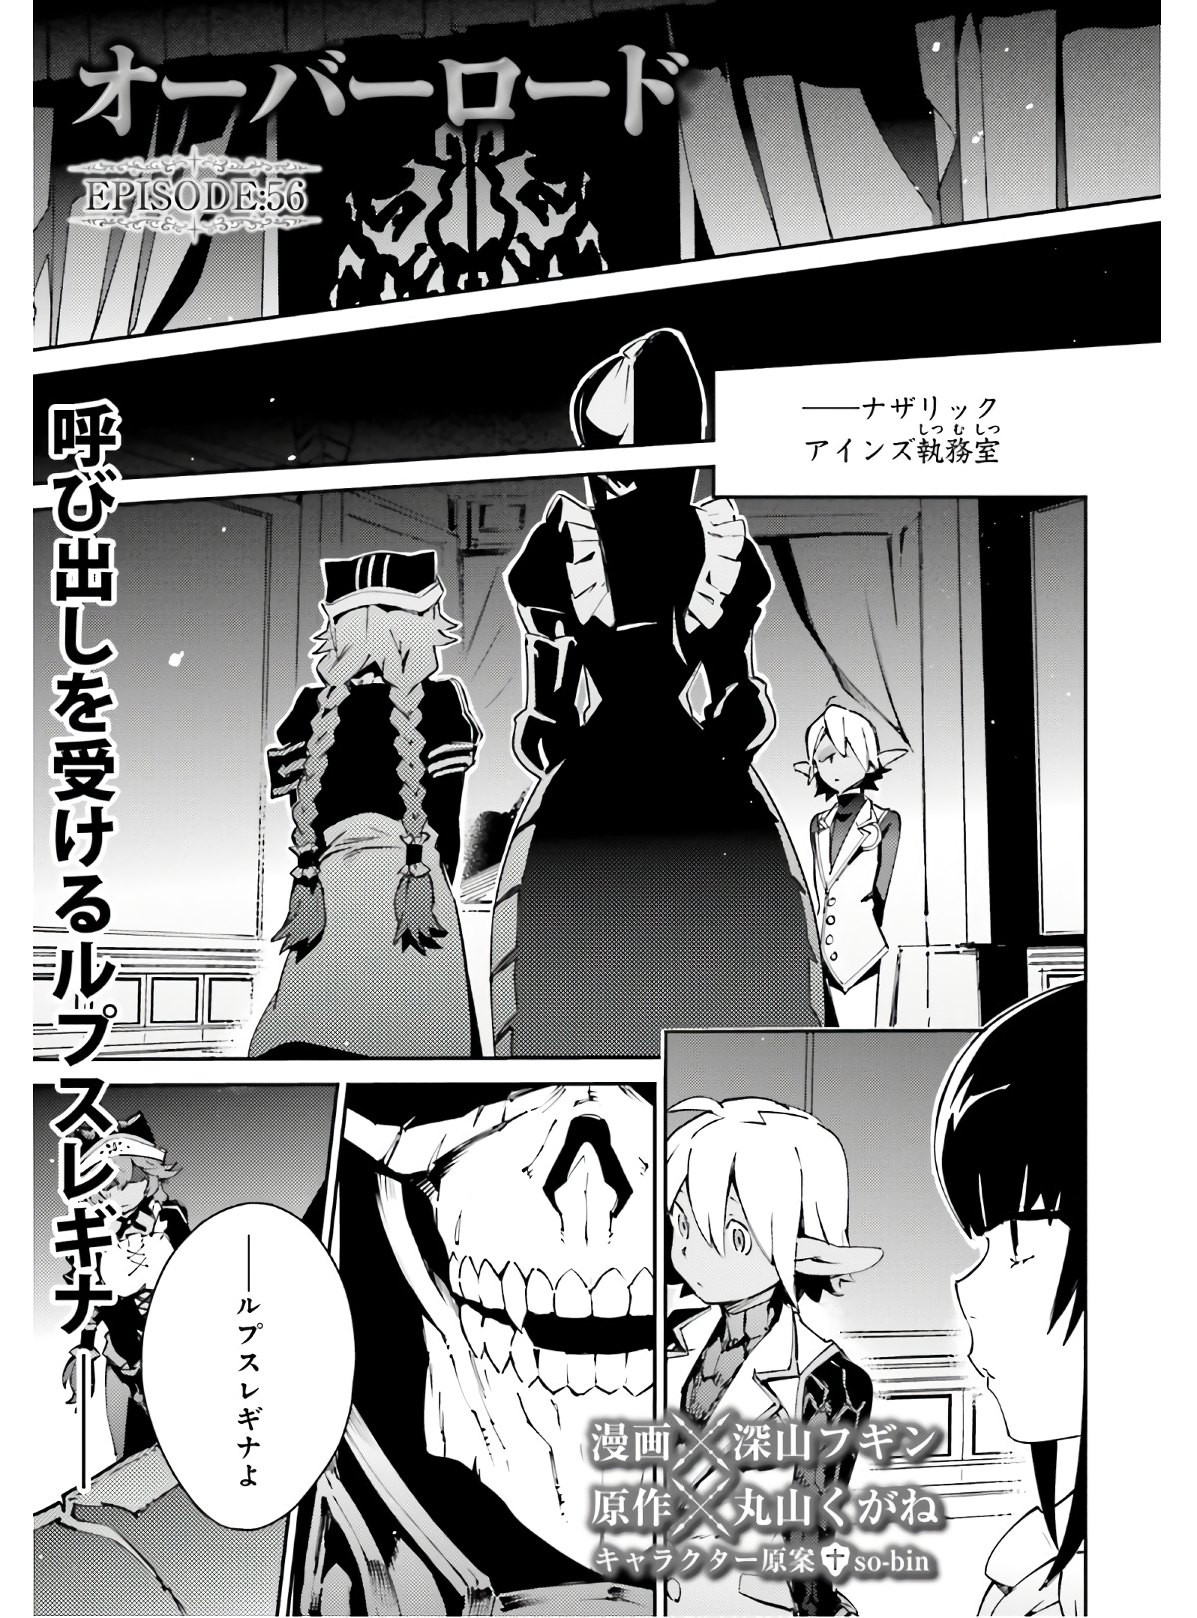 Overlord - Chapter 56-2 - Page 1